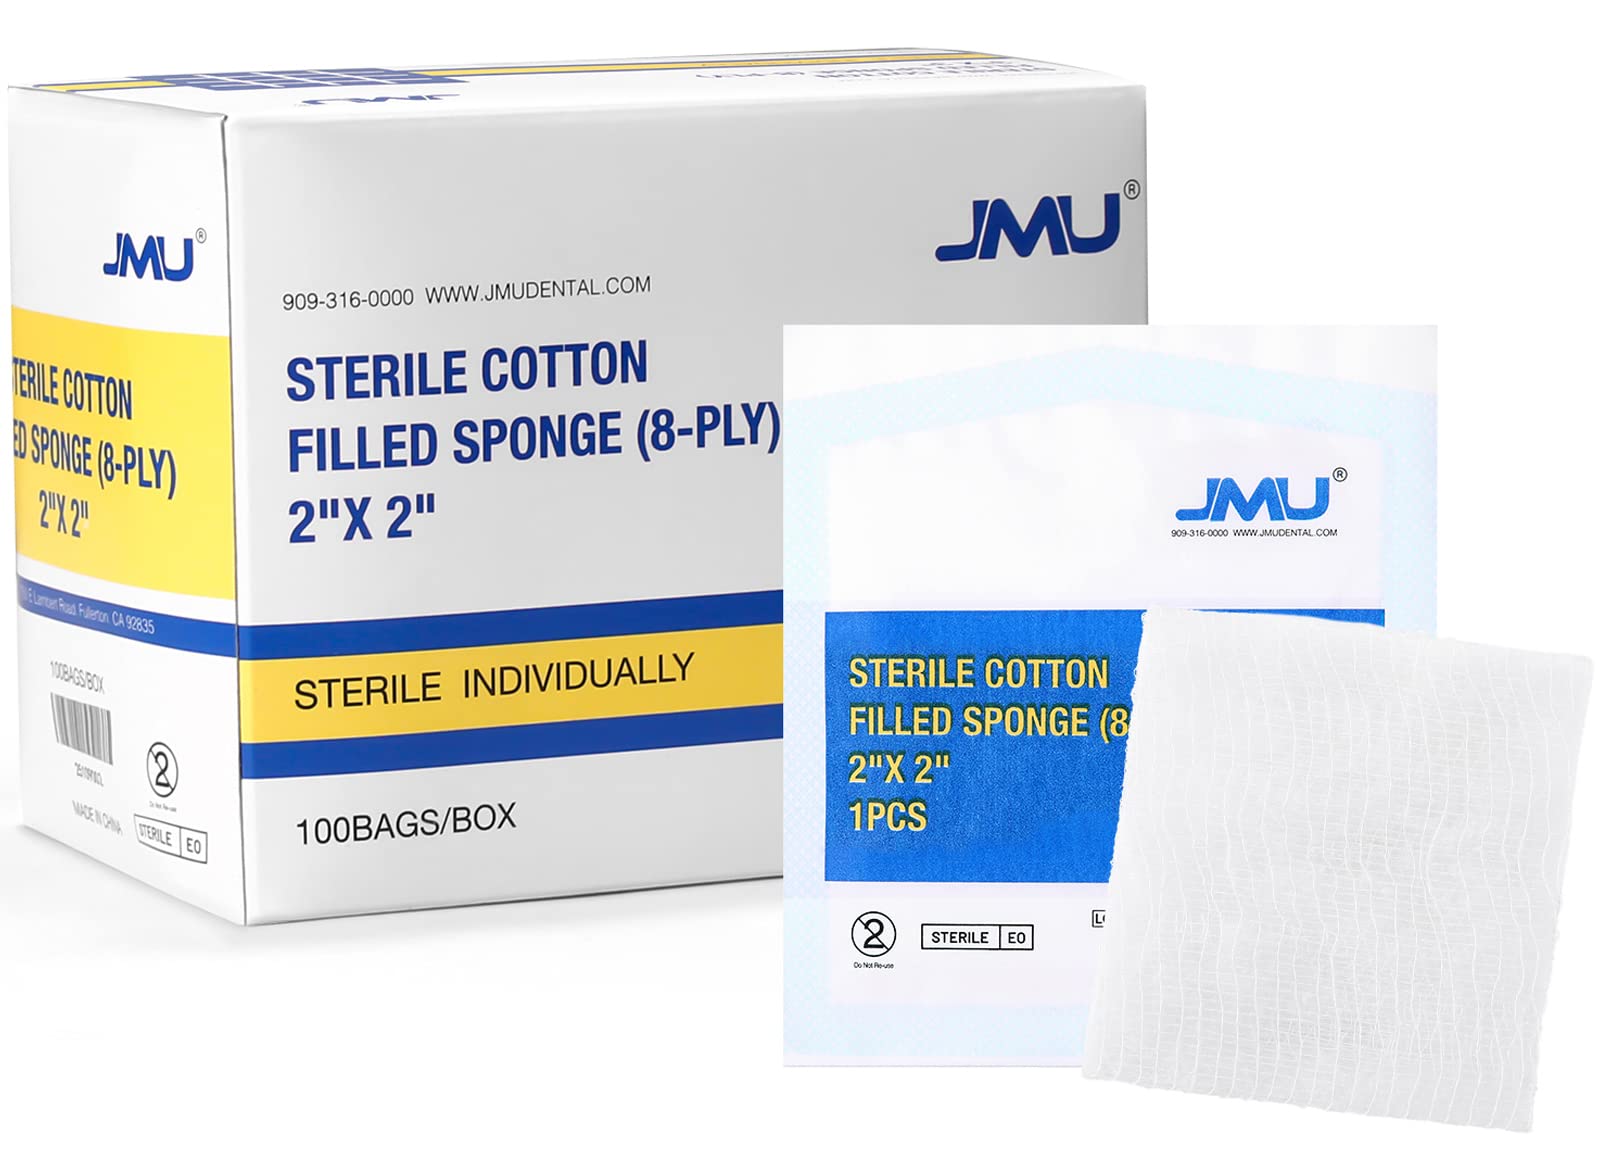 JJ CARE Sterile Gauze Pads 3 x 3 (Pack of 100), 12-Ply Cotton Gauze Pads,  Individually-Wrapped Sterile Gauze Sponges, 100% Woven, Non-Stick Medical